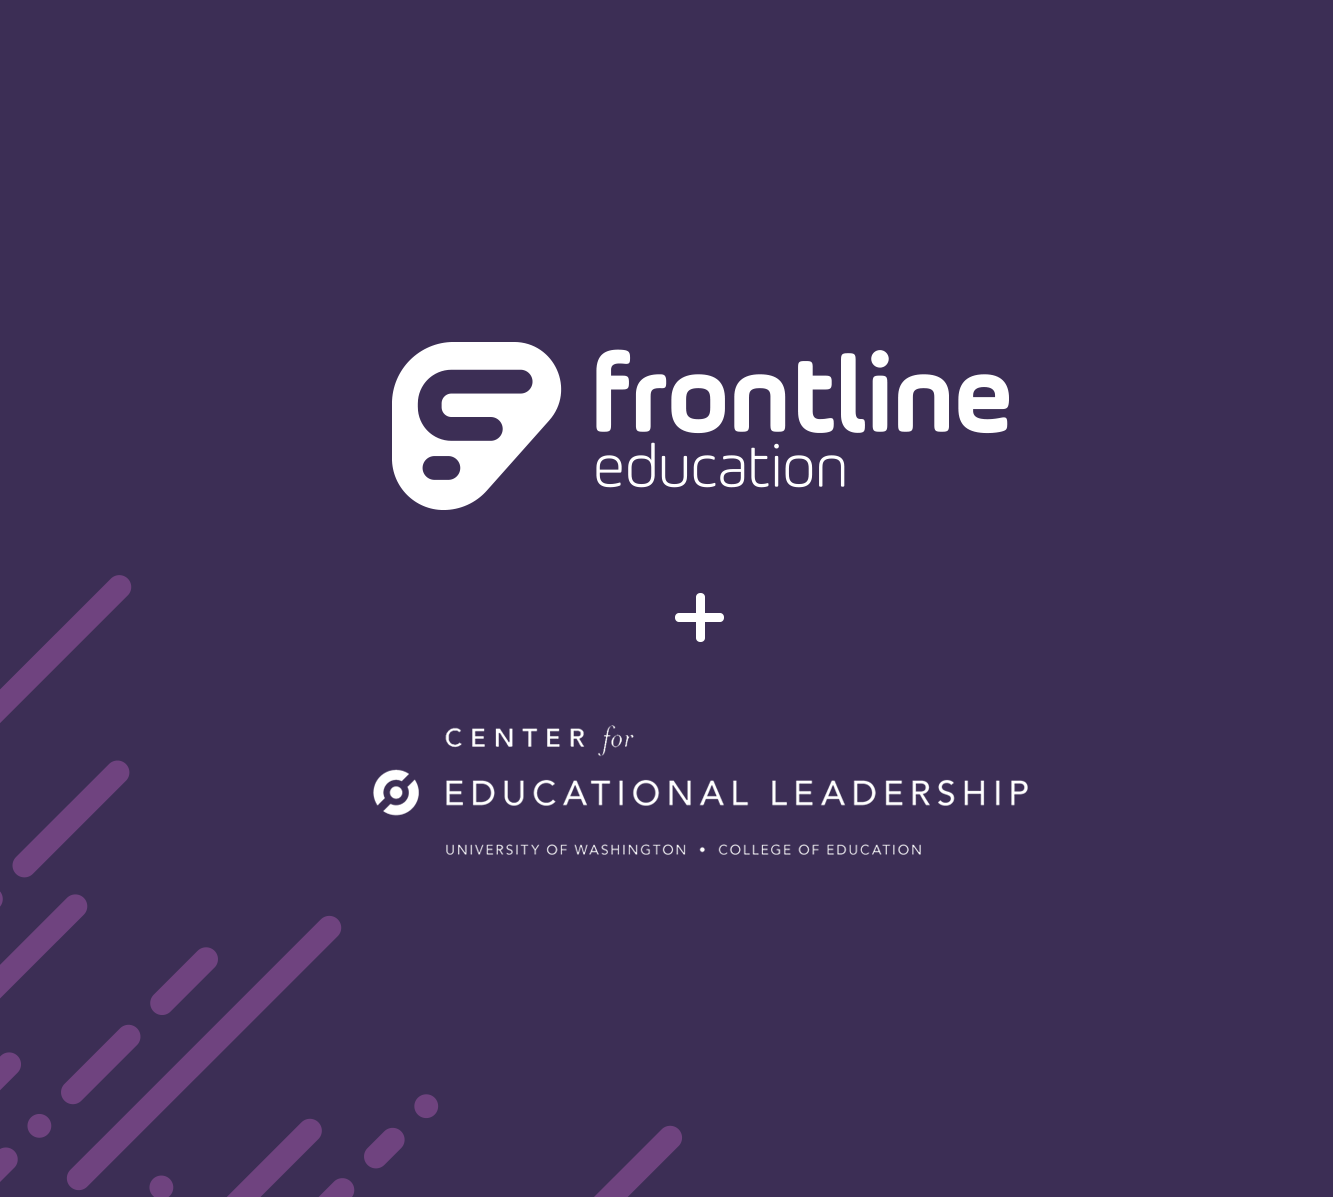 Frontline Education Partners with University of Washington Center for Educational Leadership to Offer 5D+™ Rubric for Instructional Growth and Teacher Evaluation